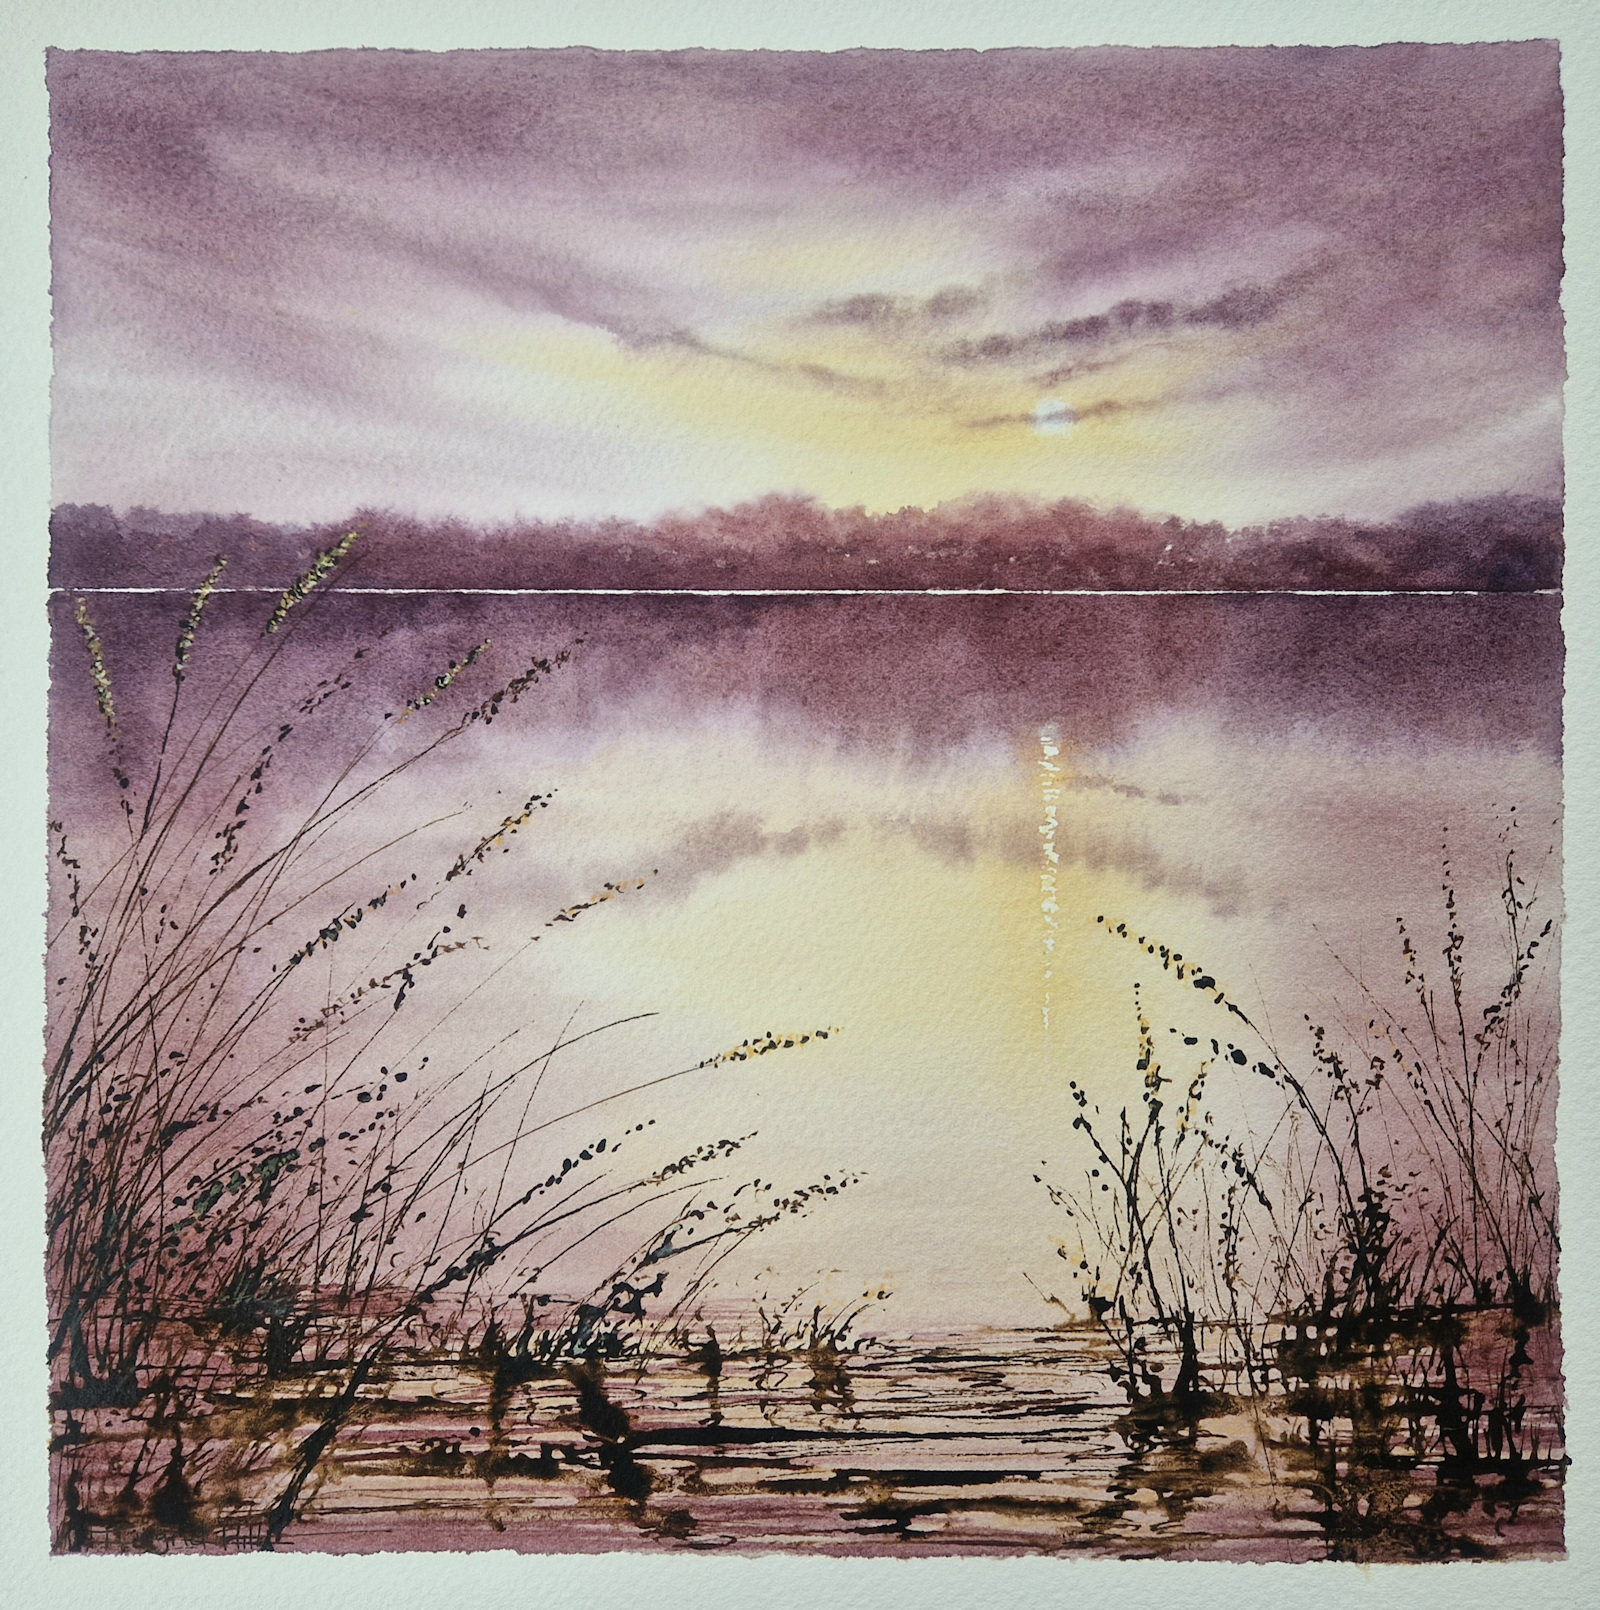 Painting of a sunset reflecting in still water